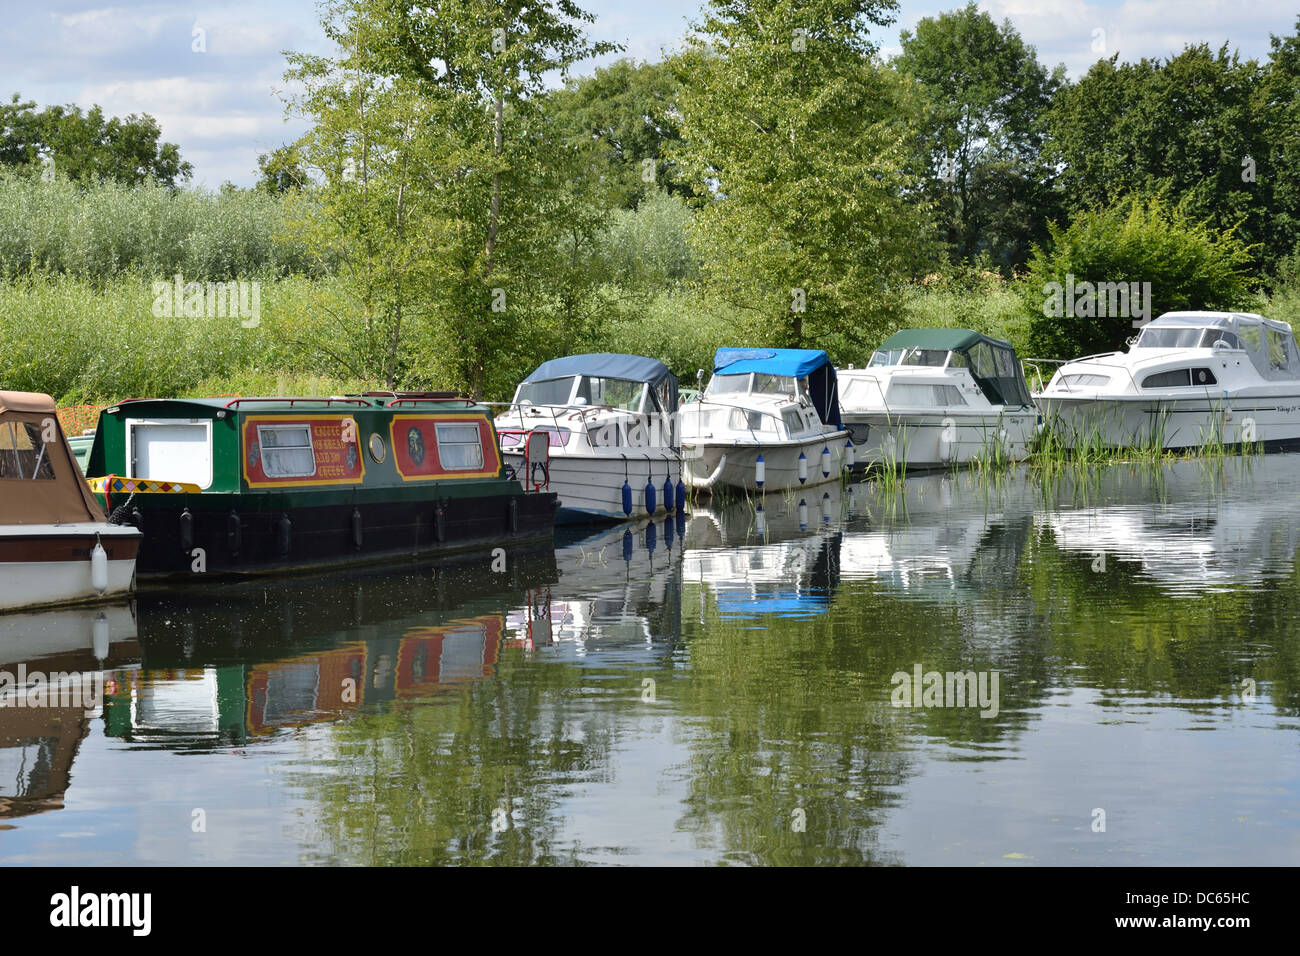 Canal boats in rural setting Stock Photo